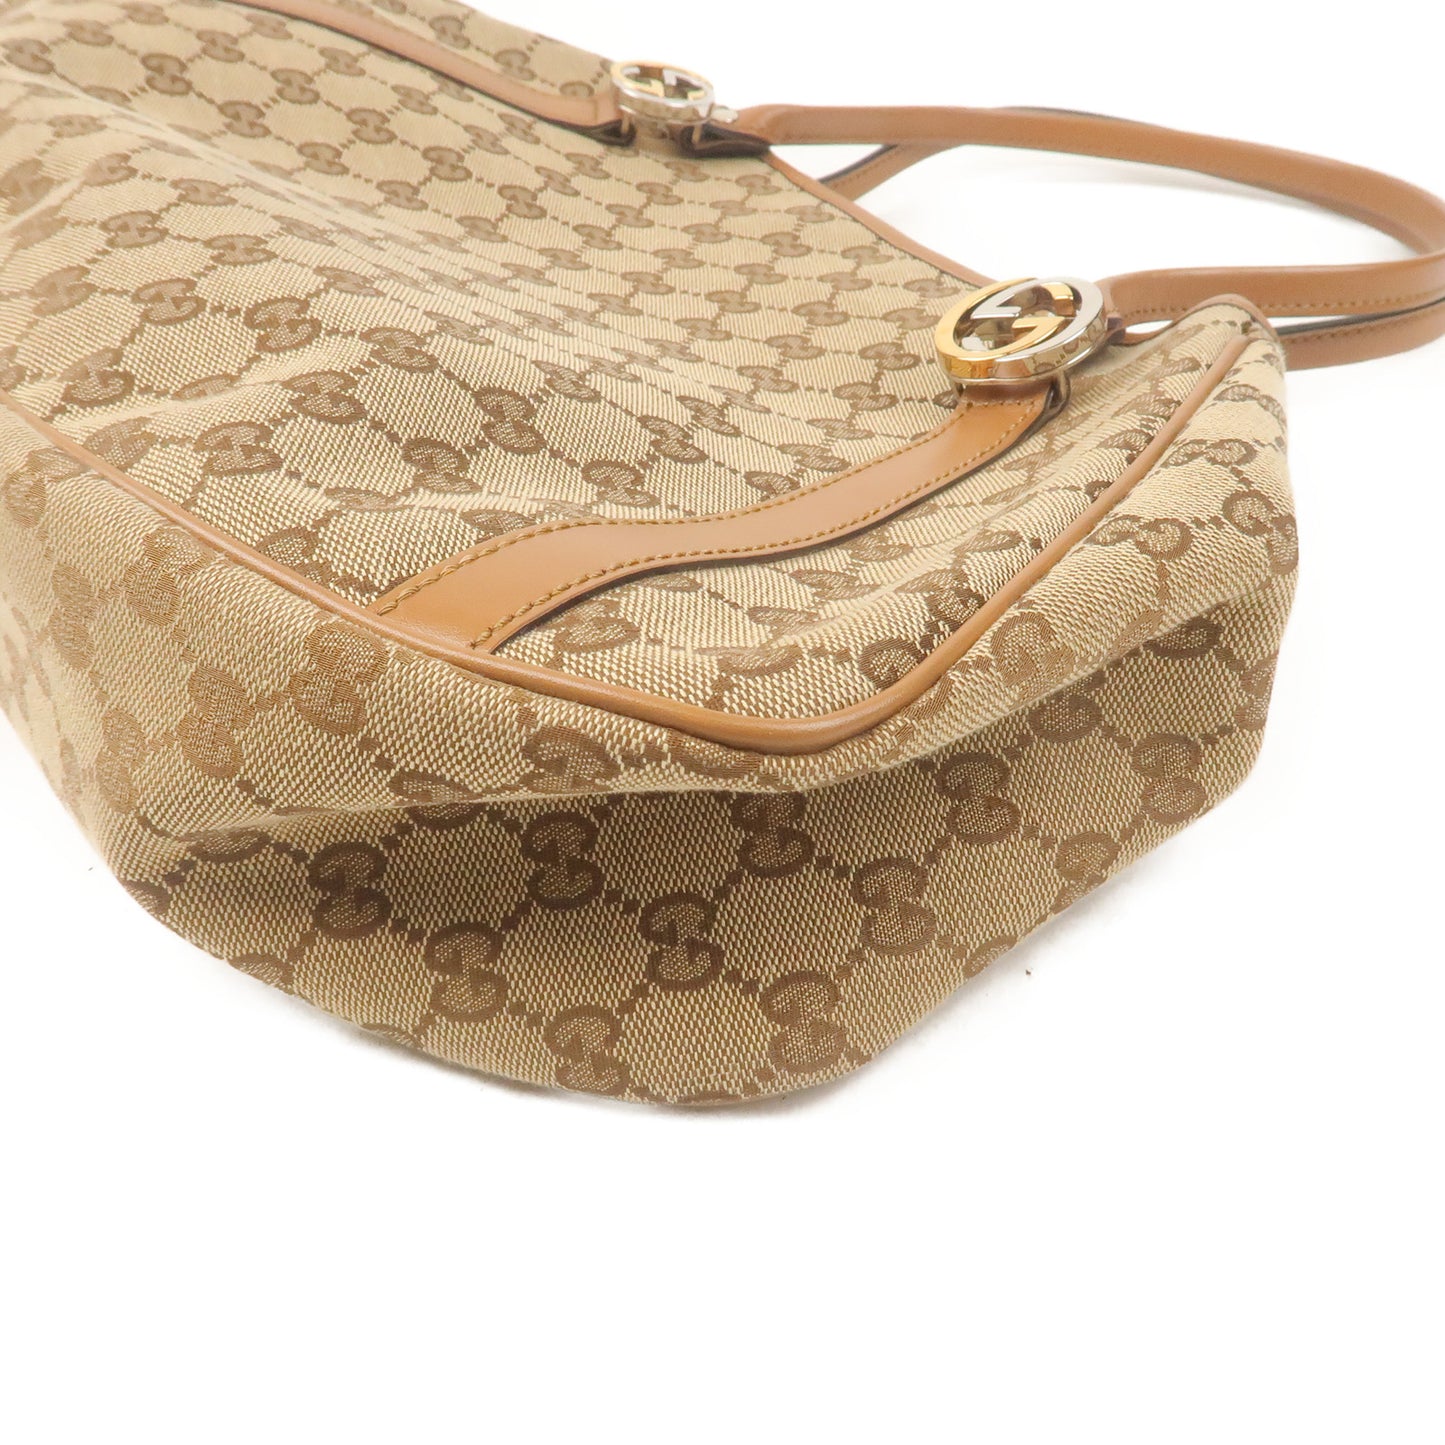 GUCCI Twins GG Canvas Leather Tote Bag Beige 232963 F/S